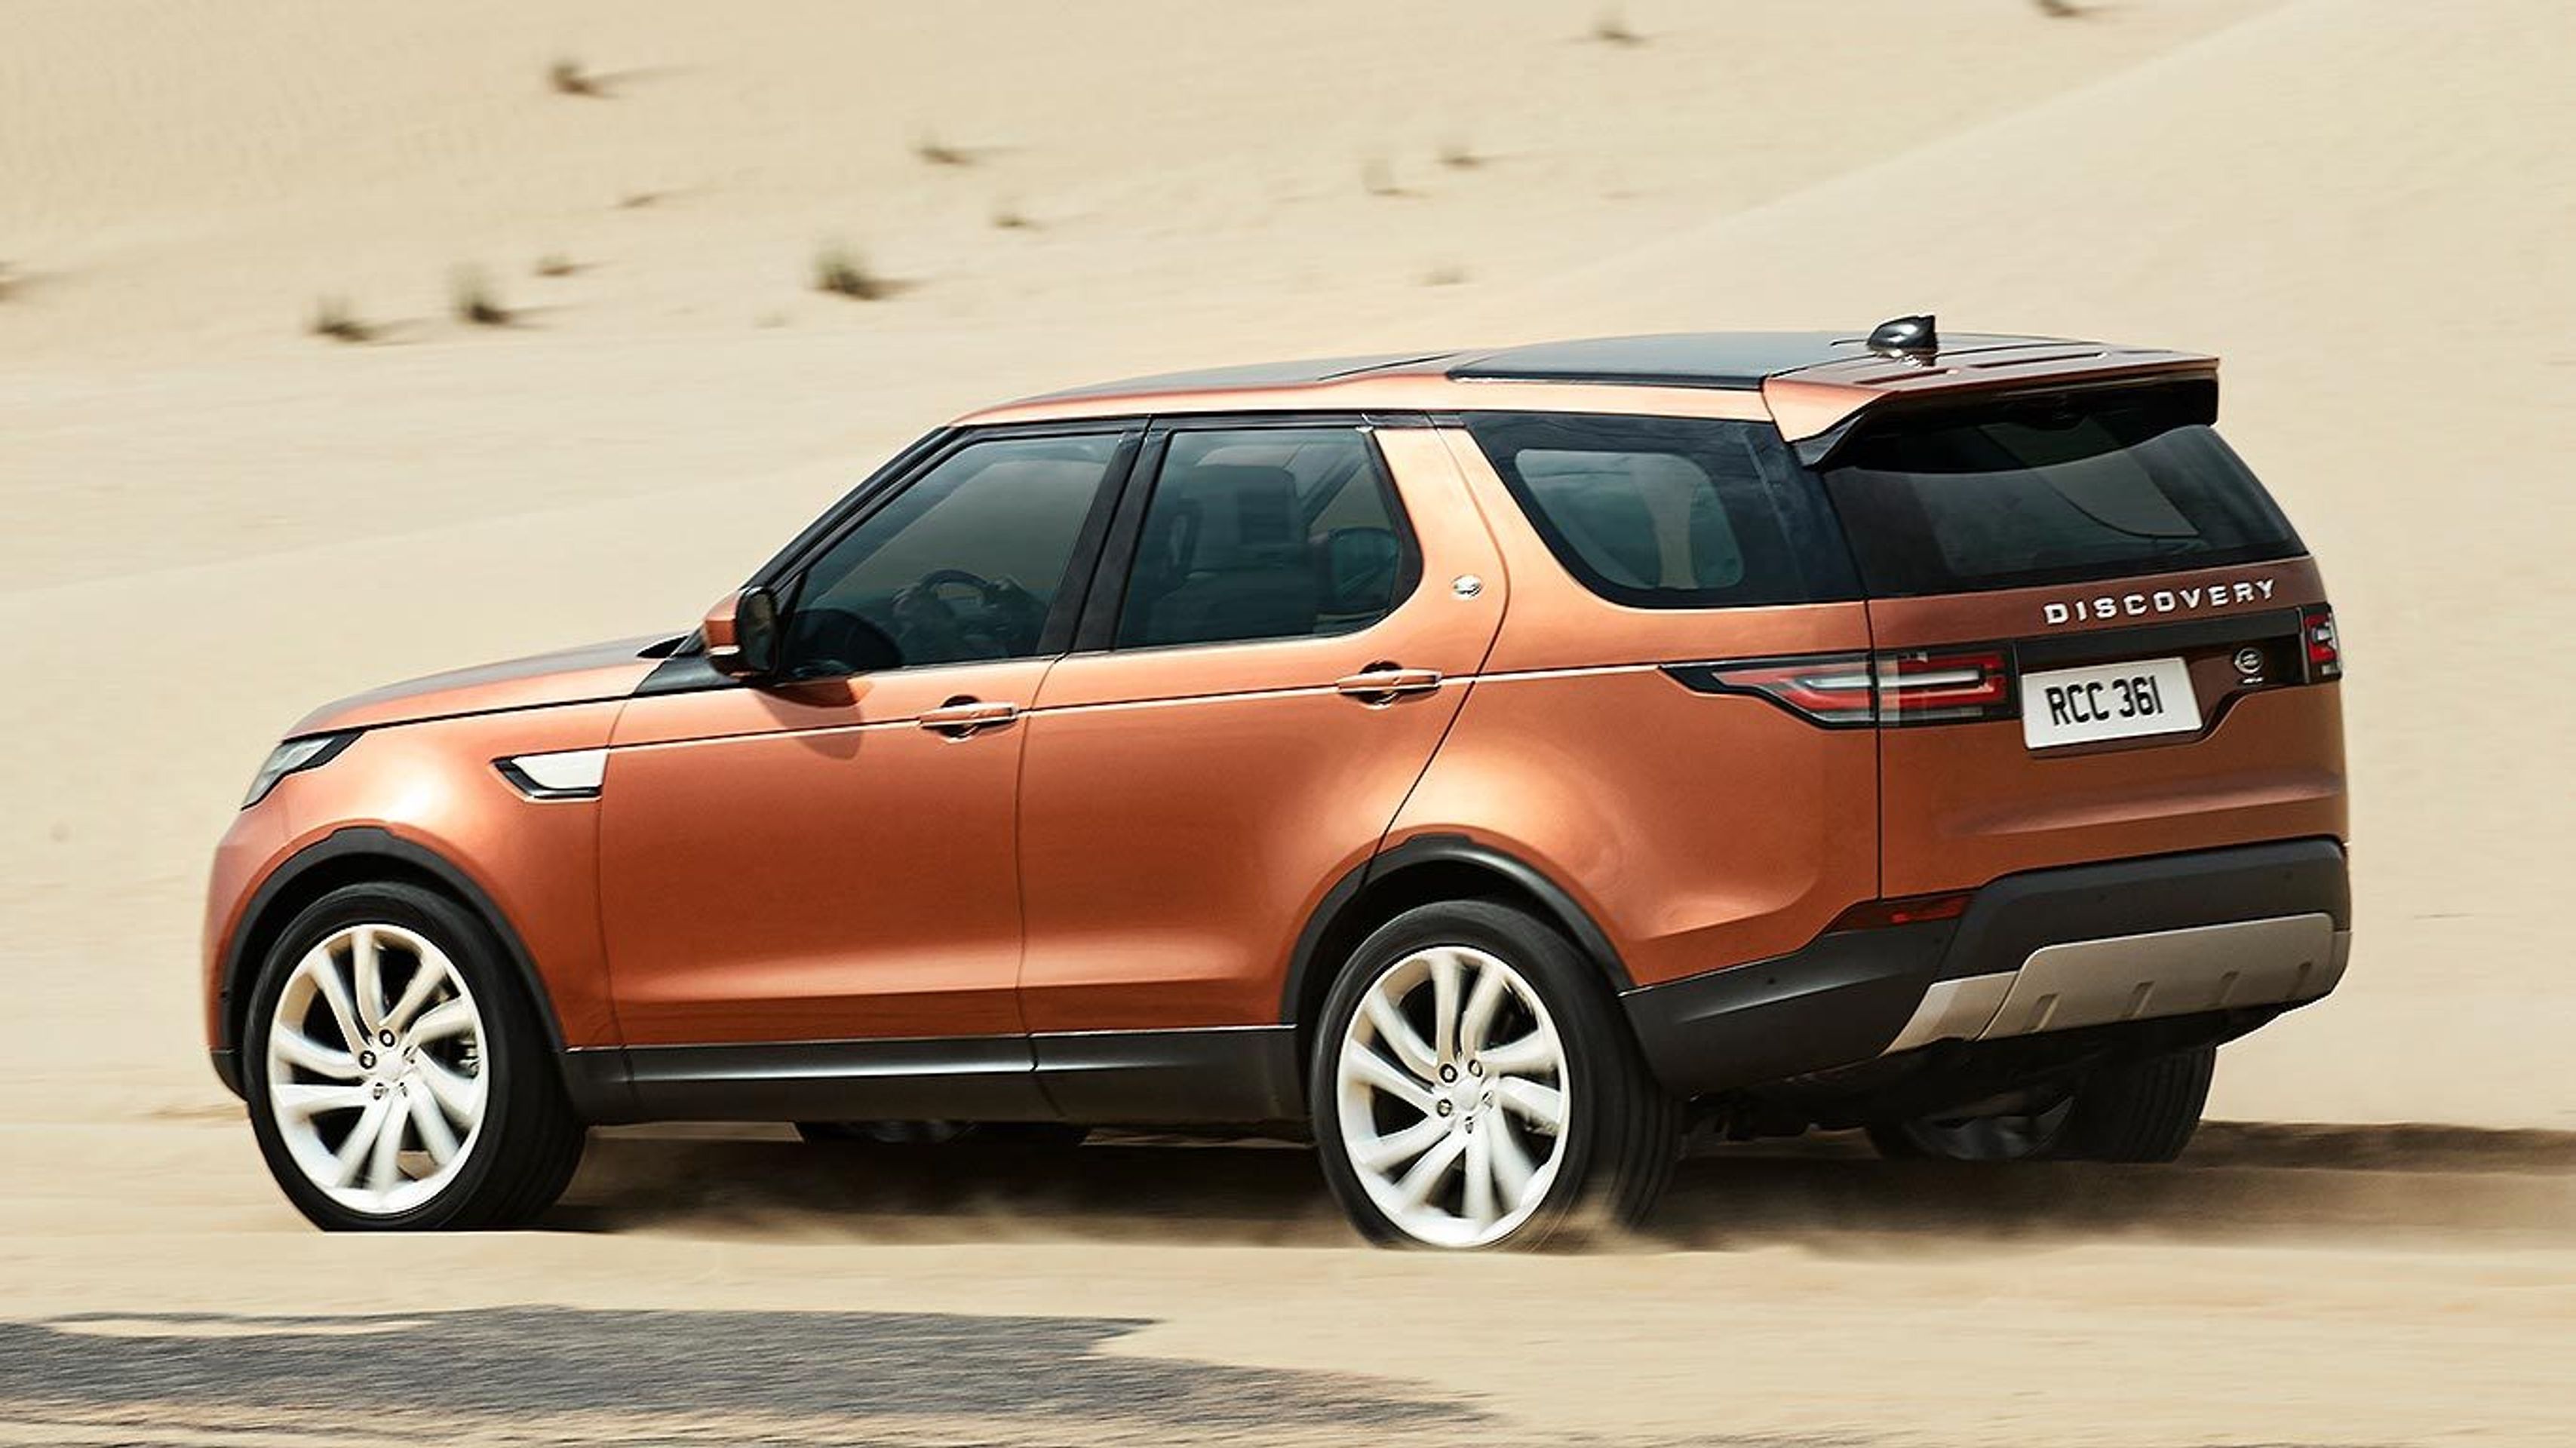 Discovery - 8 - GALERIE: Land Rover Discovery (7/7)